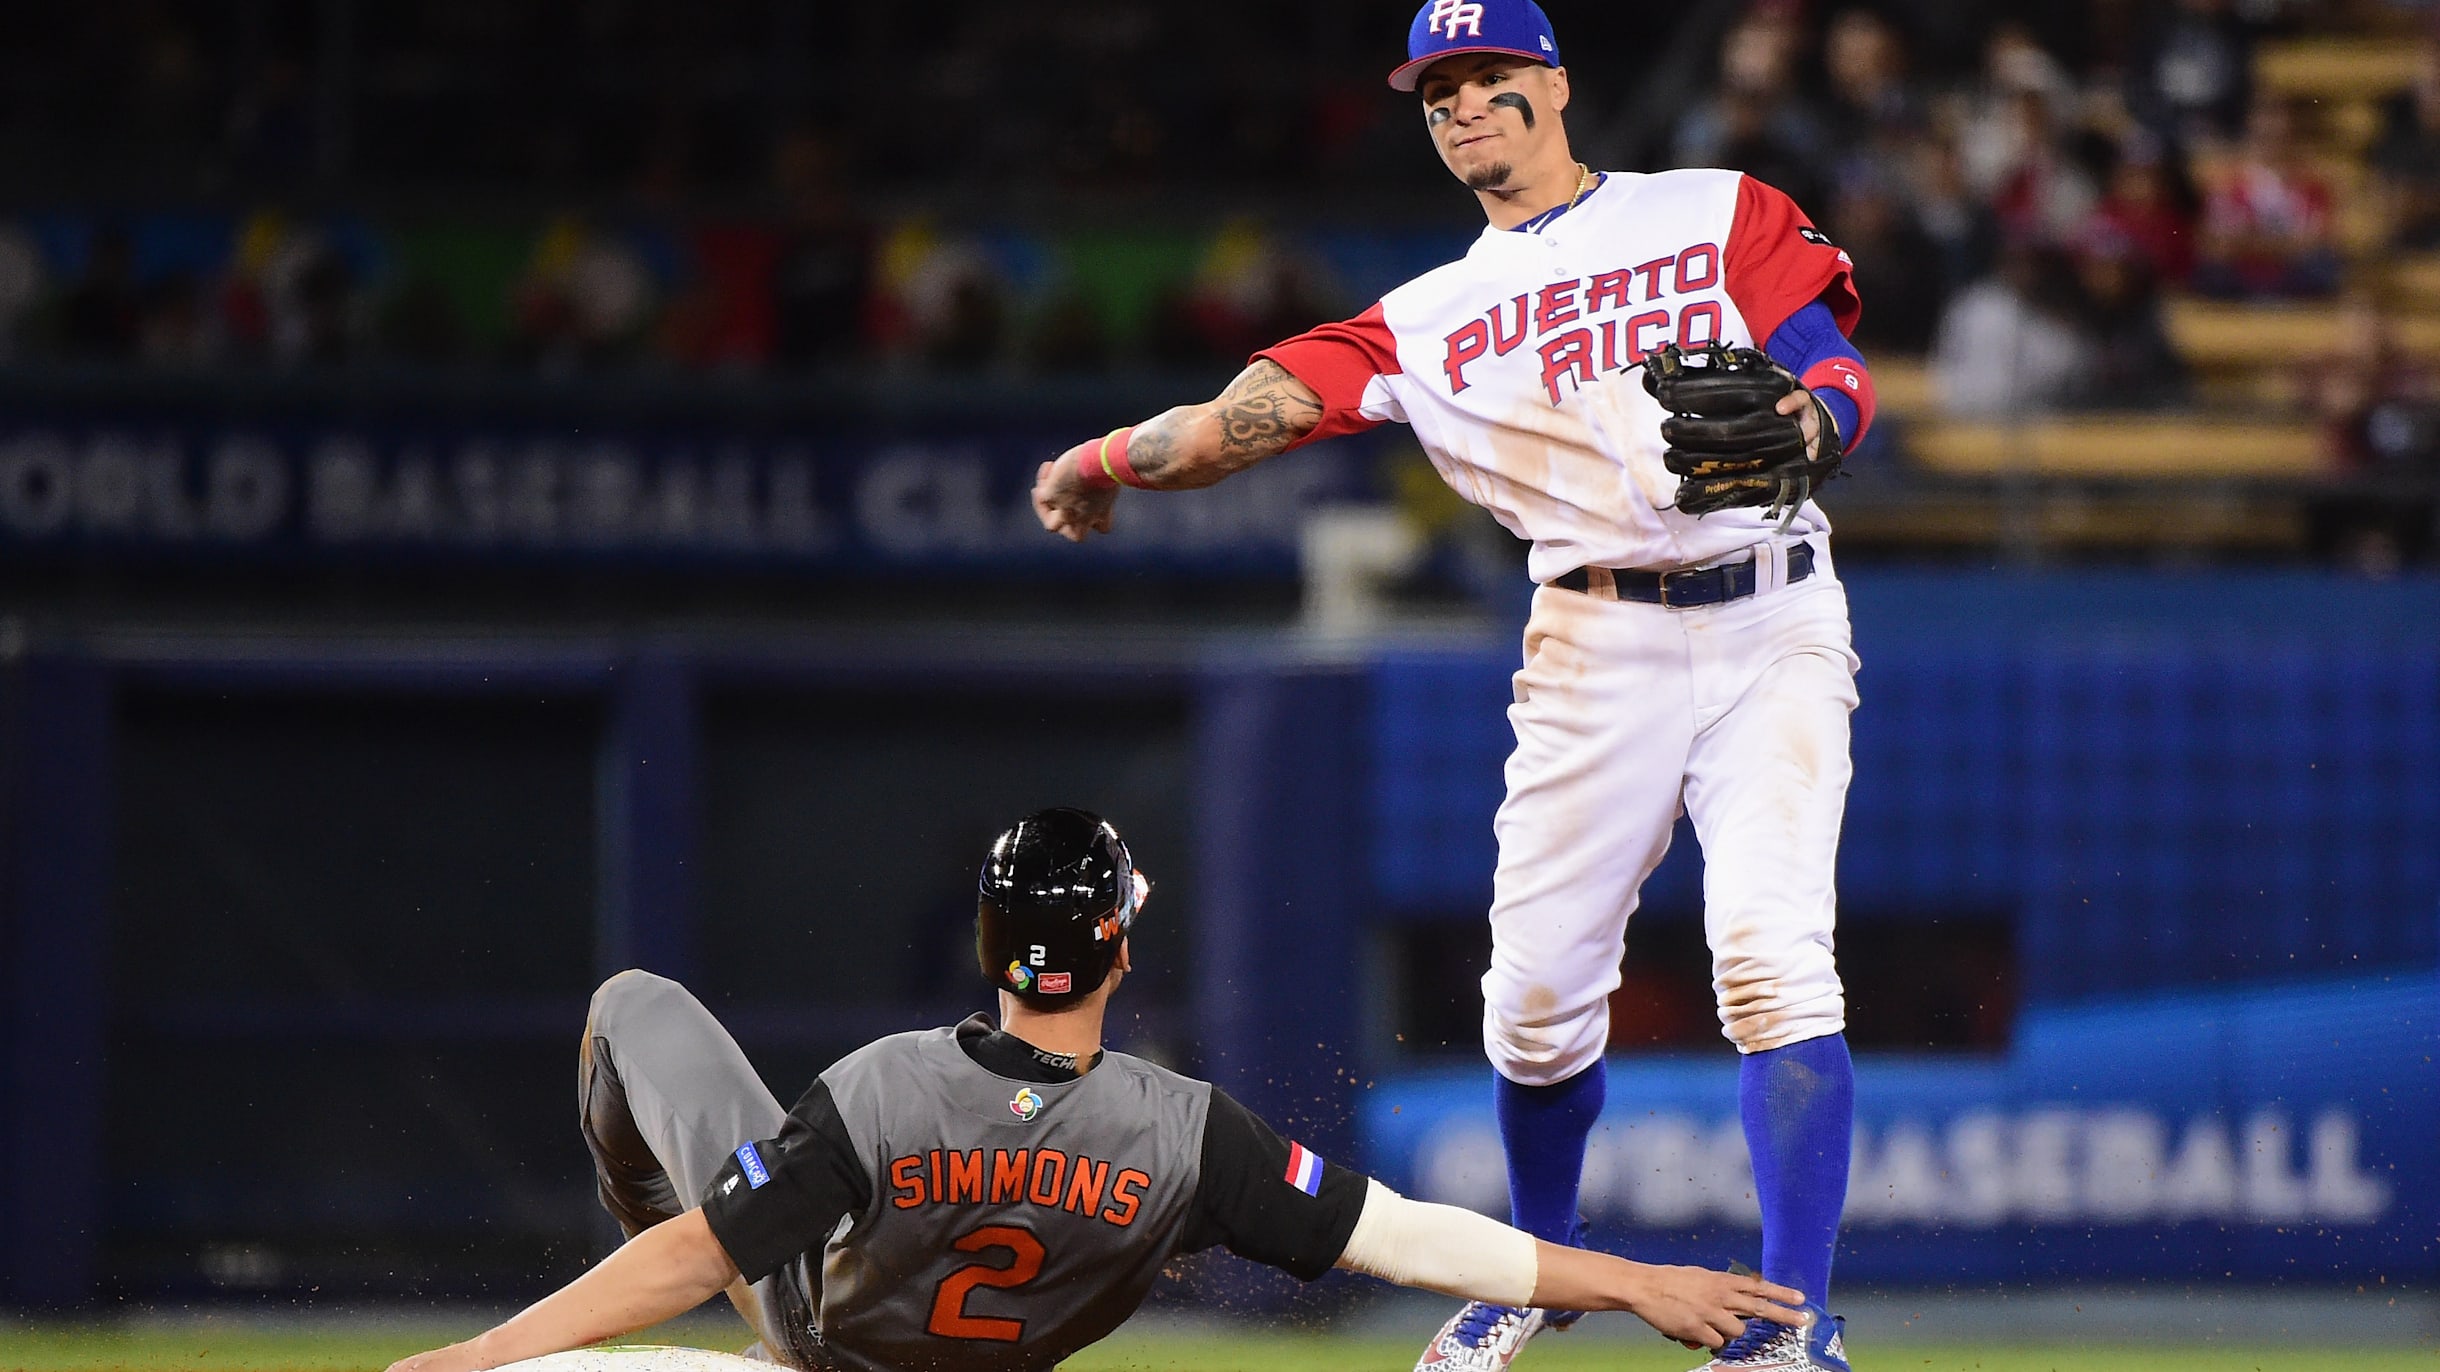 World Baseball Classic 2023: All team rosters and managers - complete list